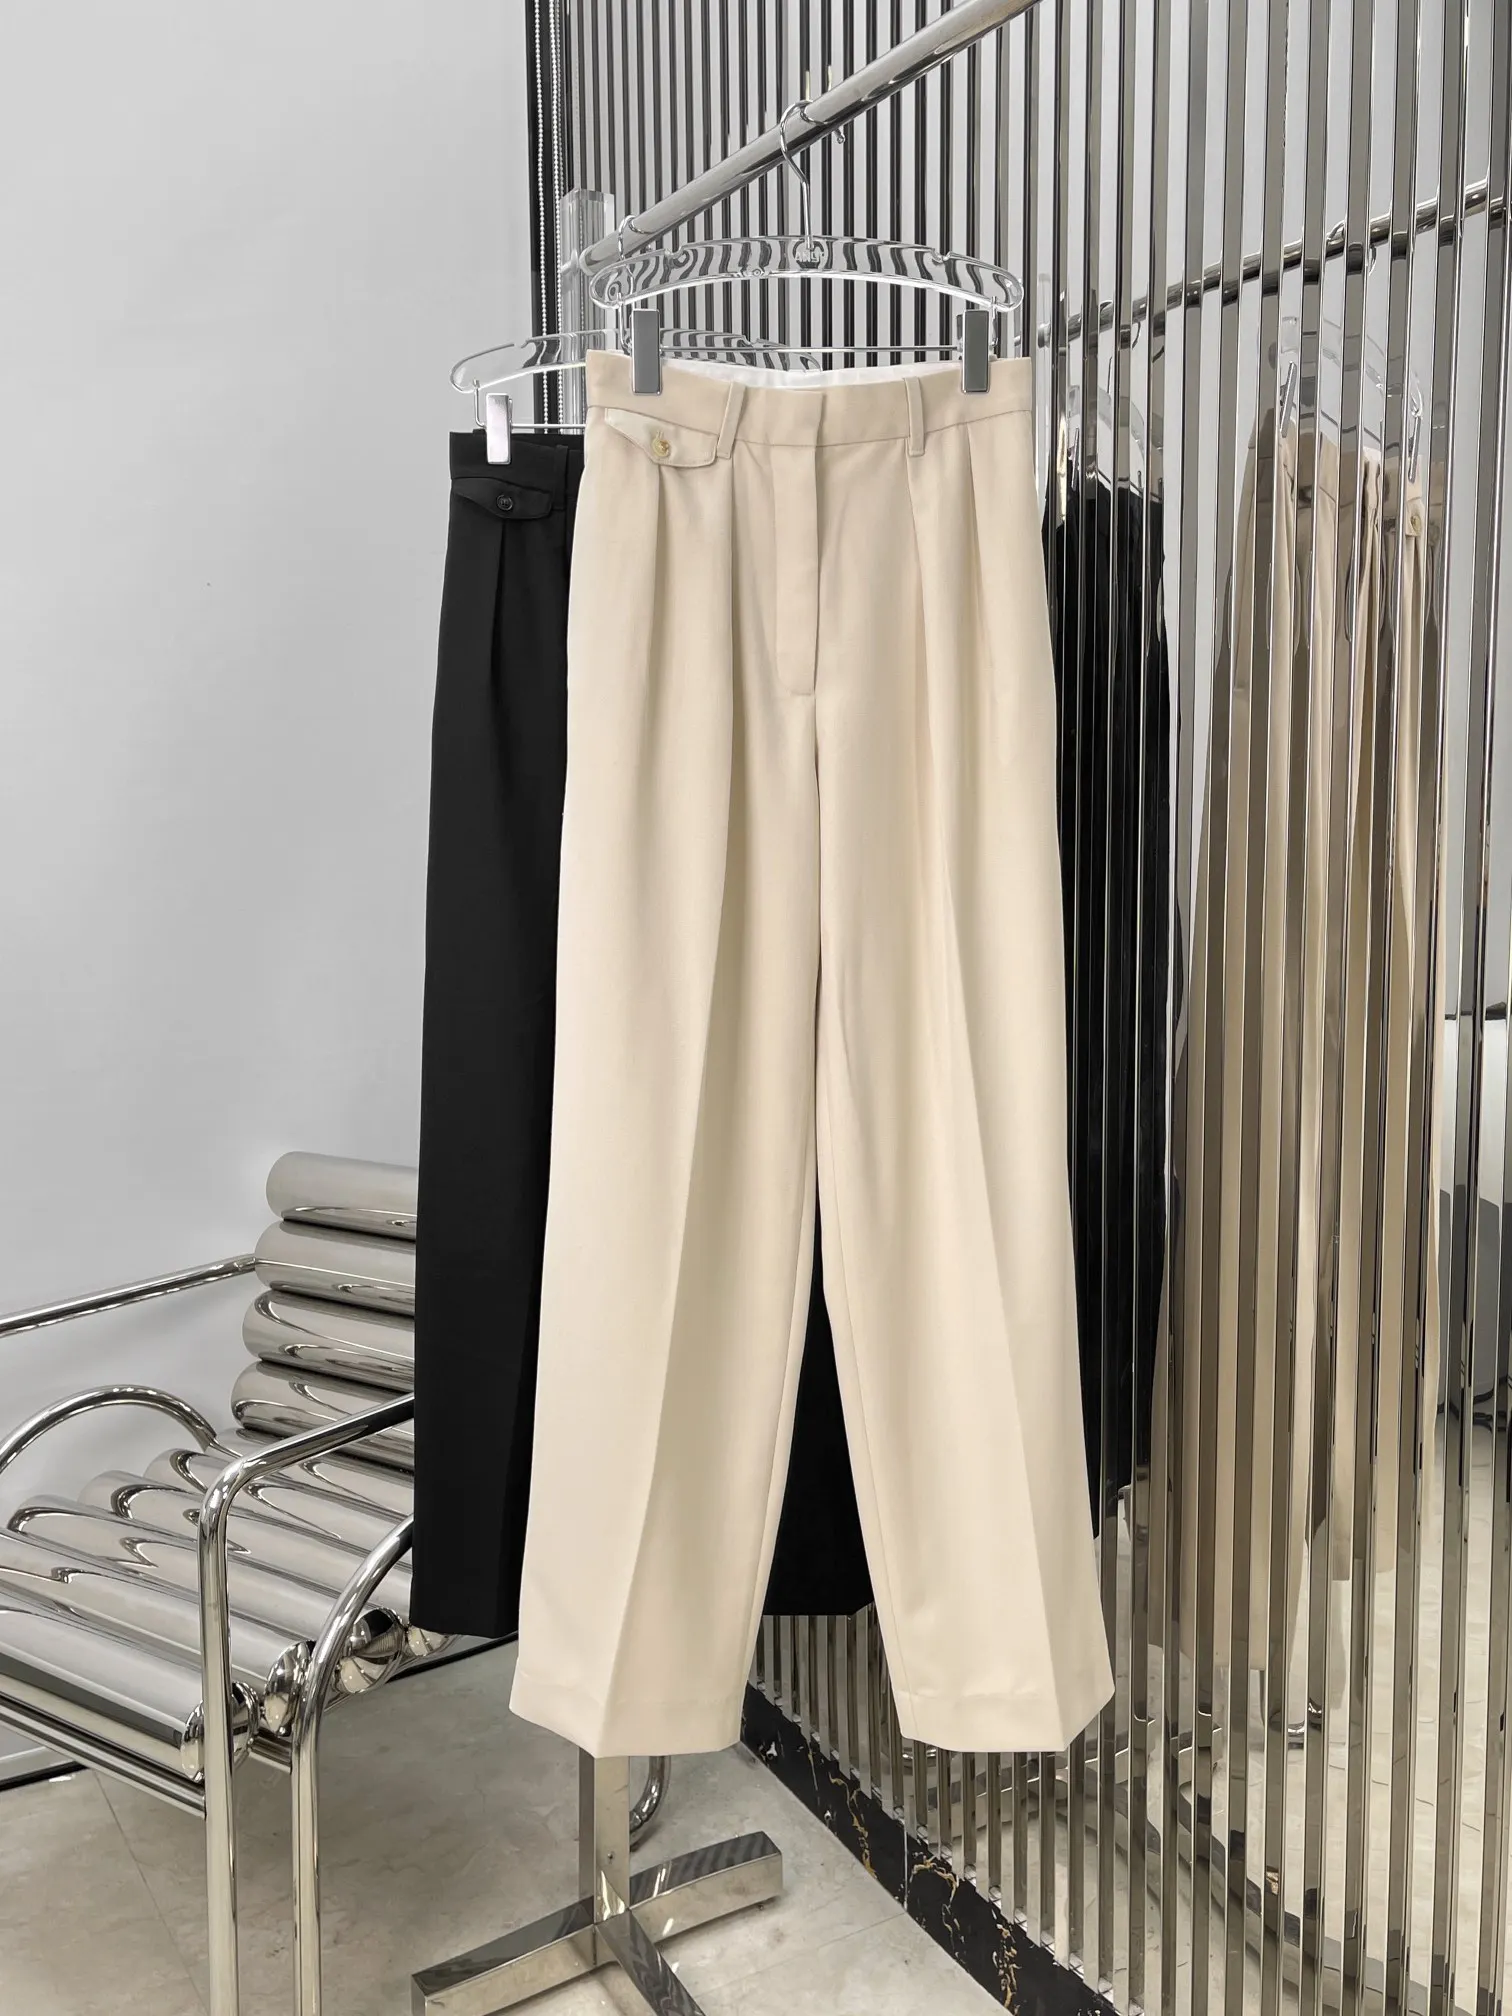 2023 spring and summer women's clothing fashion new Minimalist Casual Trousers